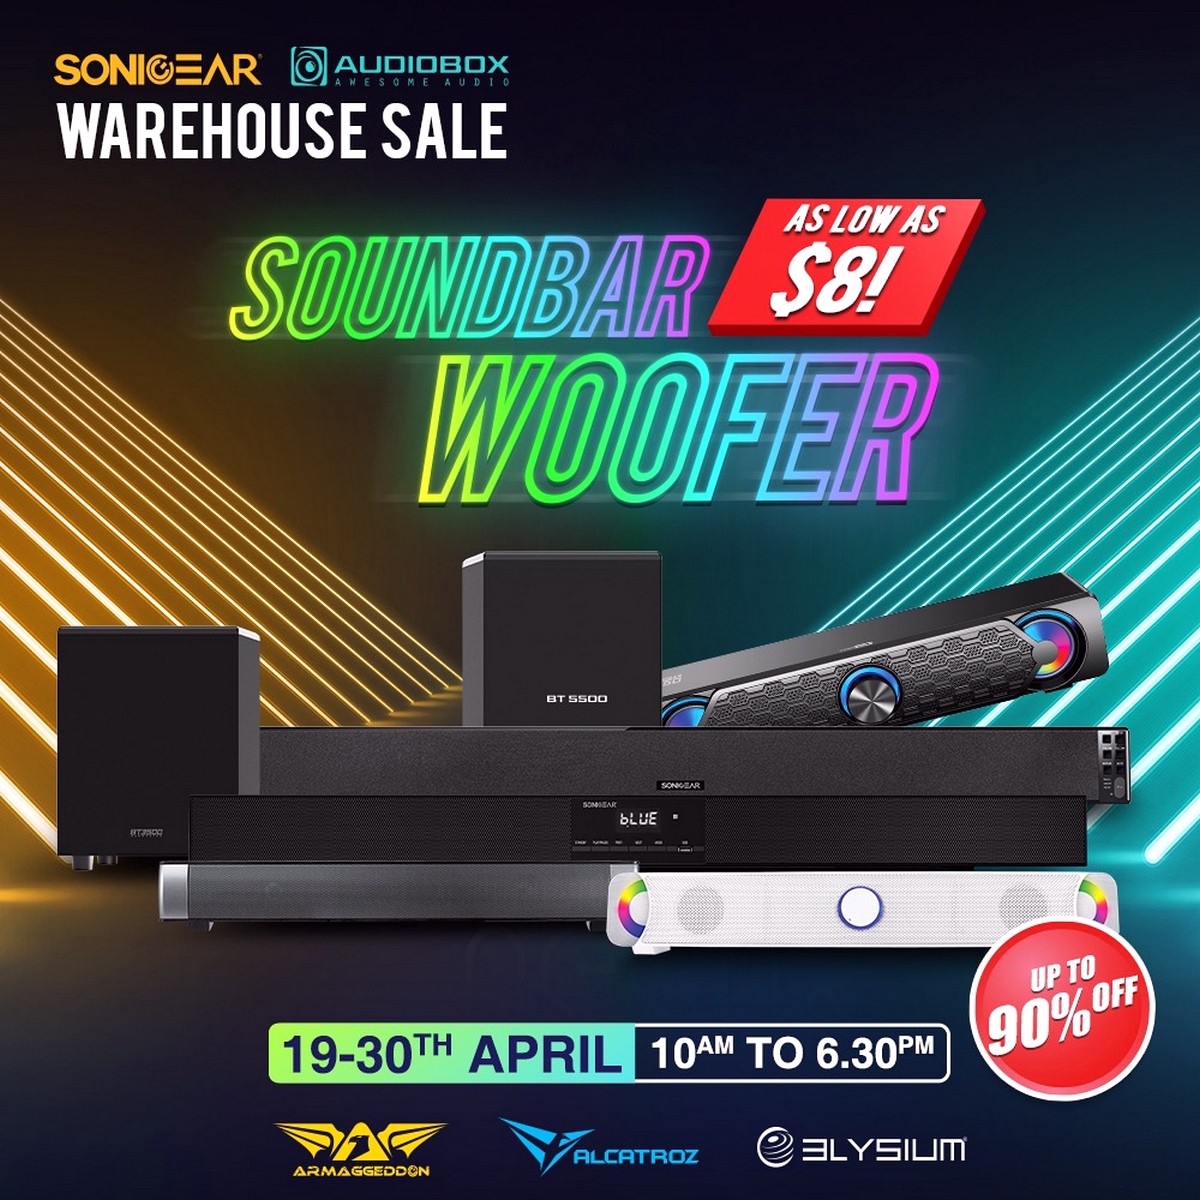 Leapfrog-Warehouse-Sale-2021-Singapore-Clearance-Armaggeddon-SonicGear-Audiobox-Alcatraoz-Elysium-3 19-30 Apr 2021: Armaggeddon, SonicGear, Audiobox, Alcatroz, Elysium Warehouse Sale Up to 90% OFF at Kallang Sector